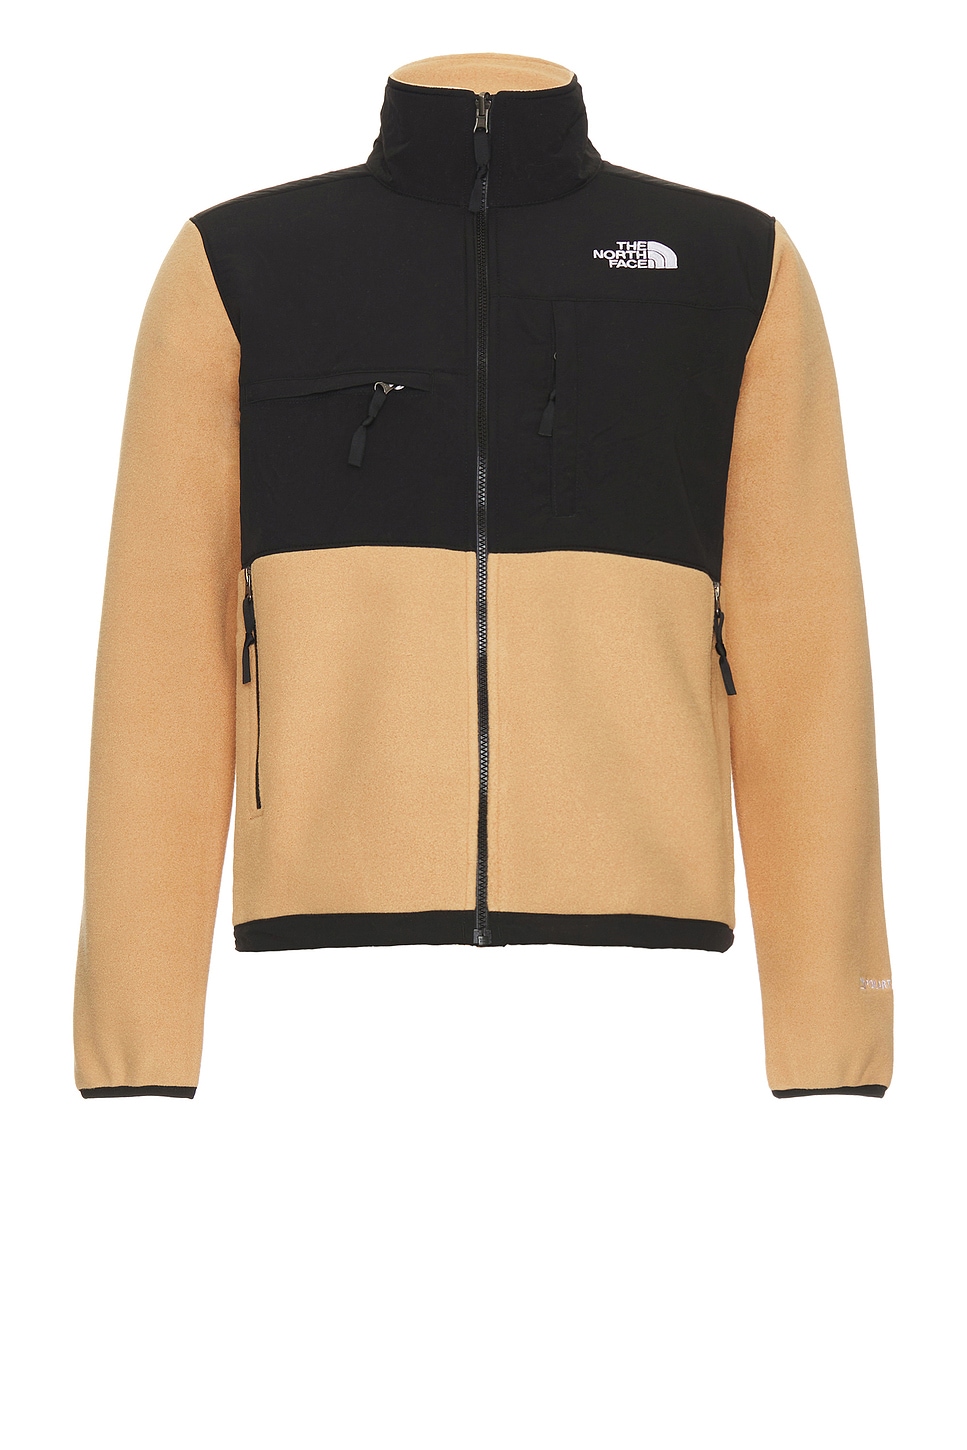 Image 1 of The North Face Denali Jacket in Almond Butter & Tnf Black